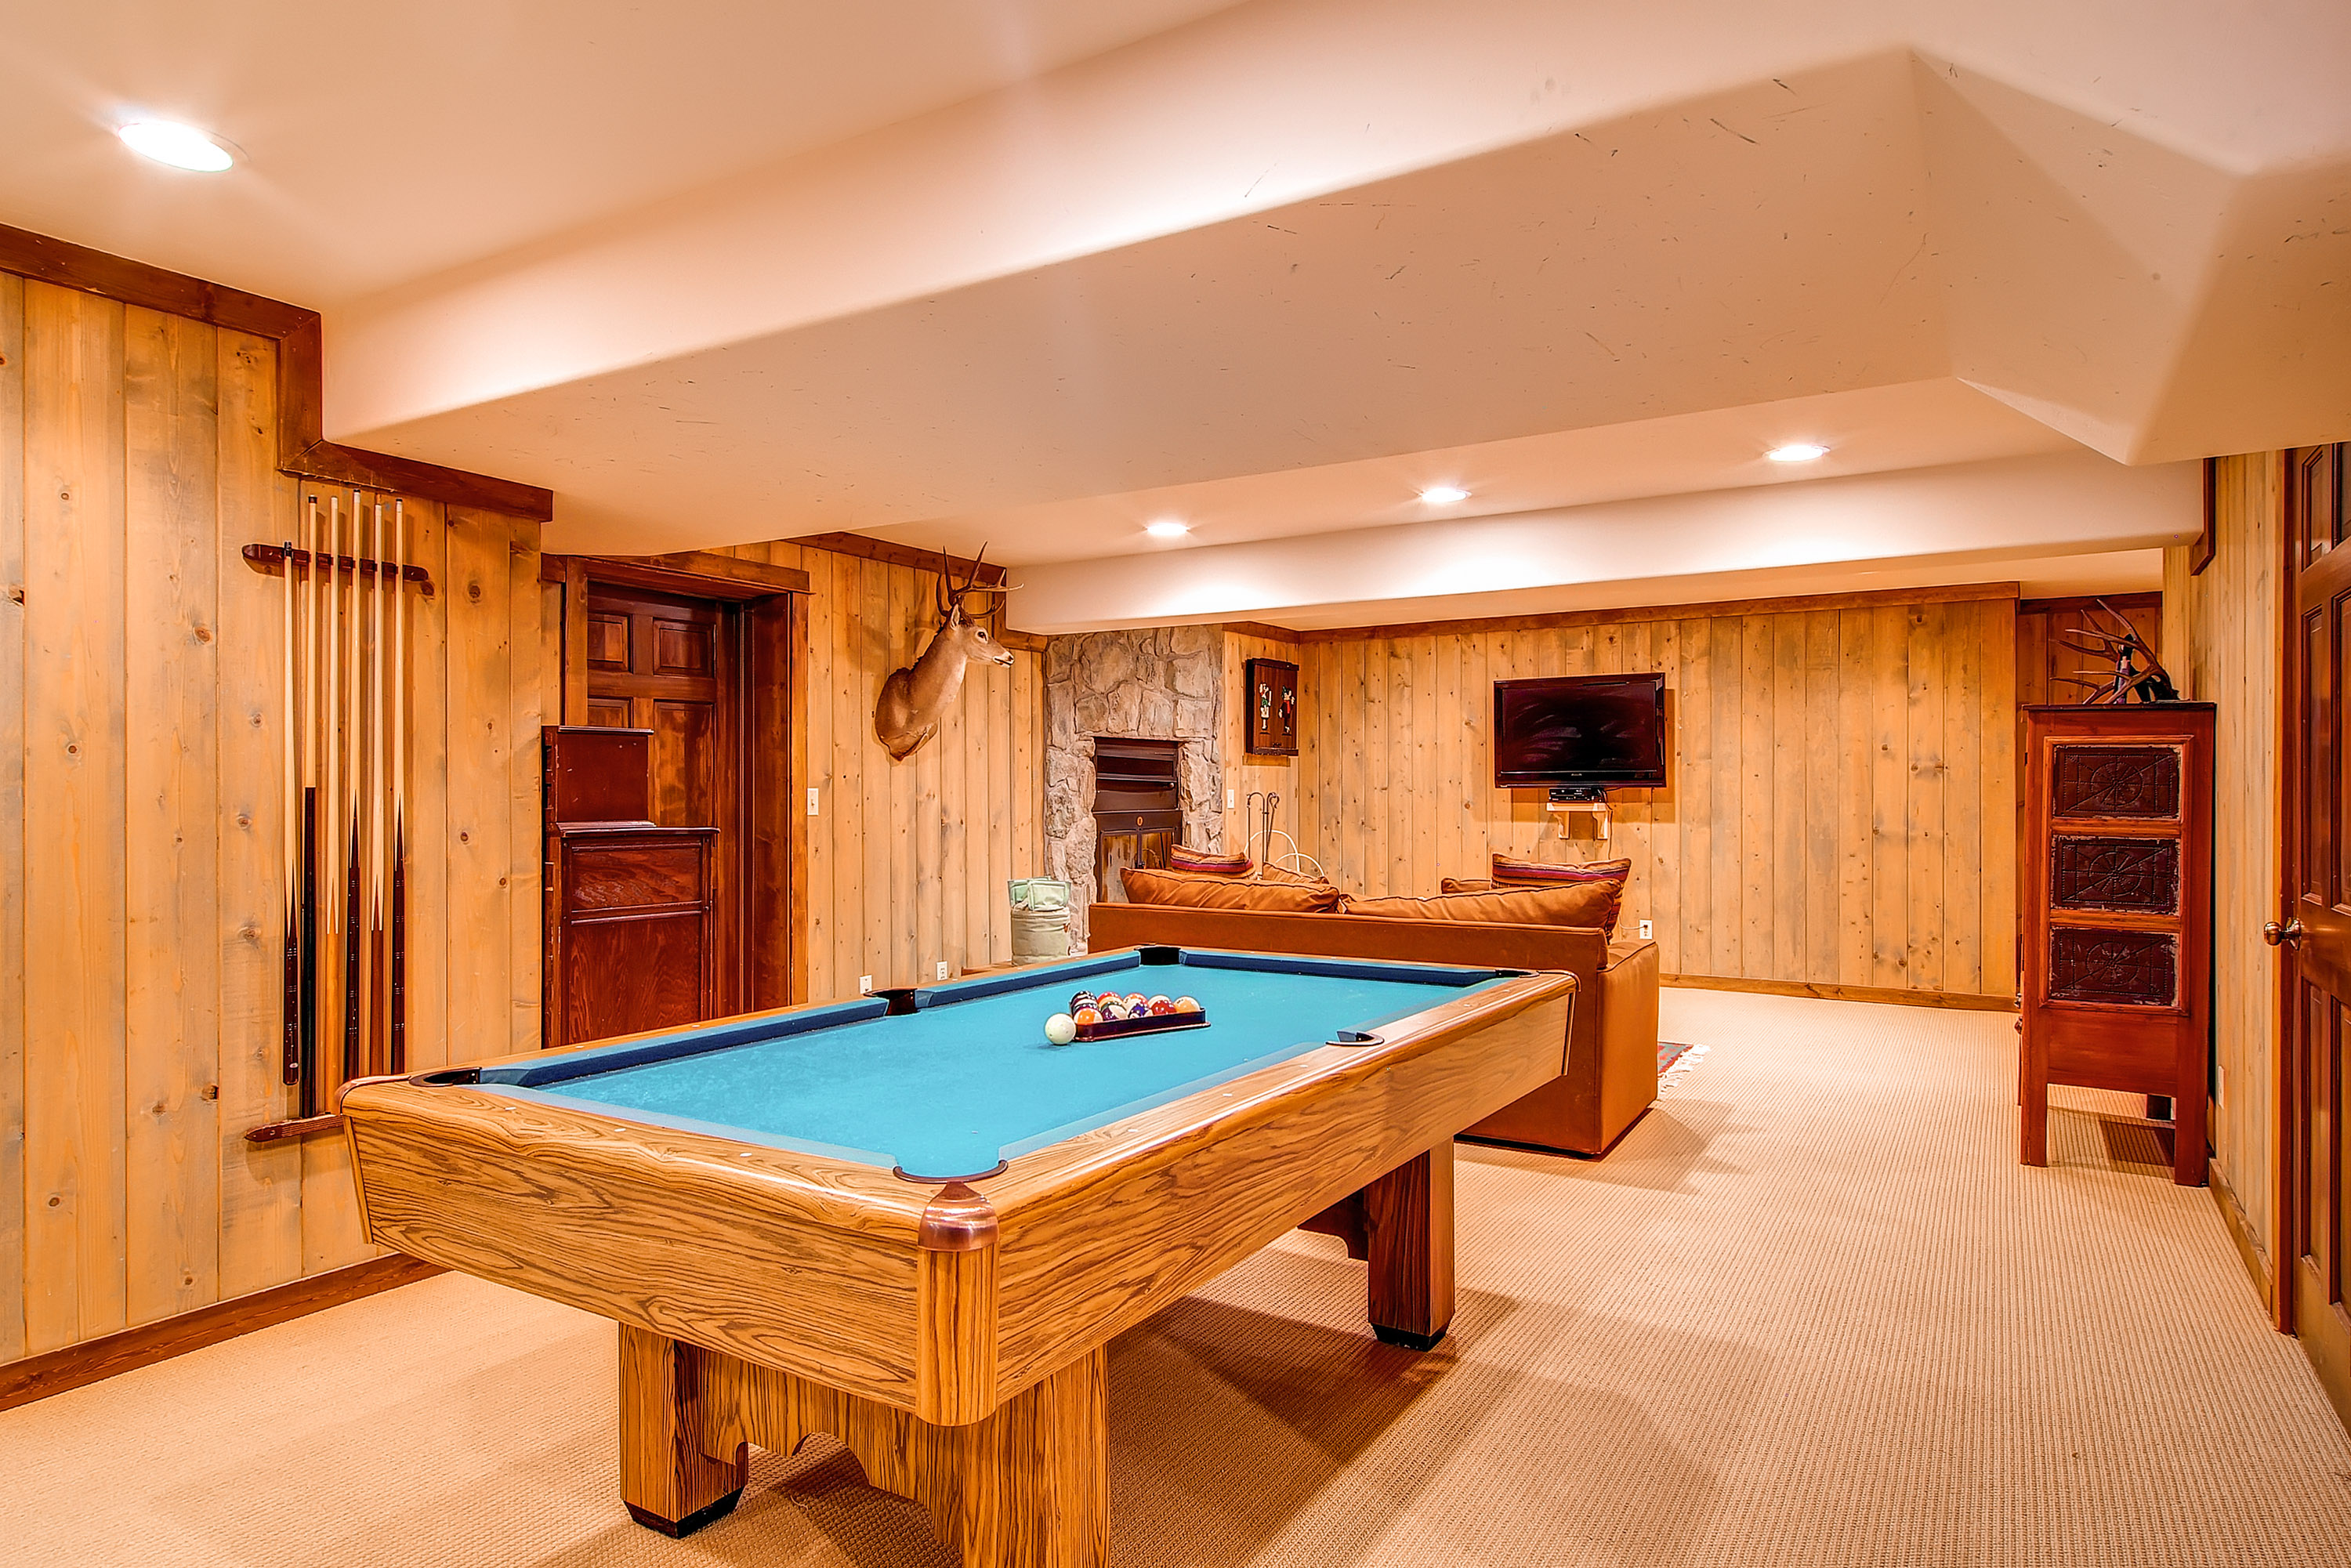 Game room and additional living room on the lower level - Bear Lodge Breckenridge Vacation Rental